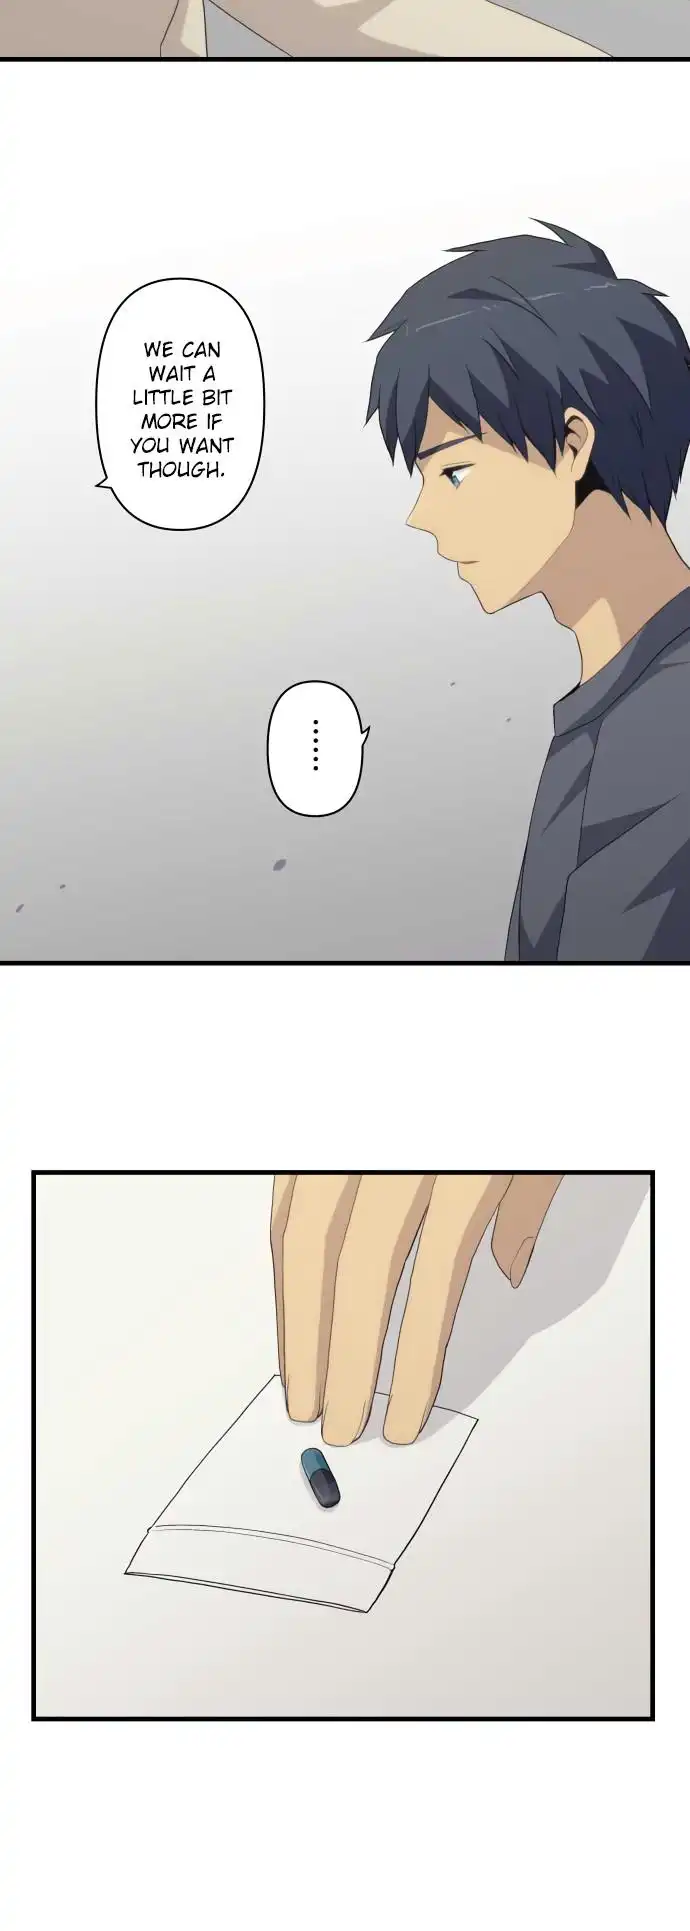 ReLIFE Chapter 214